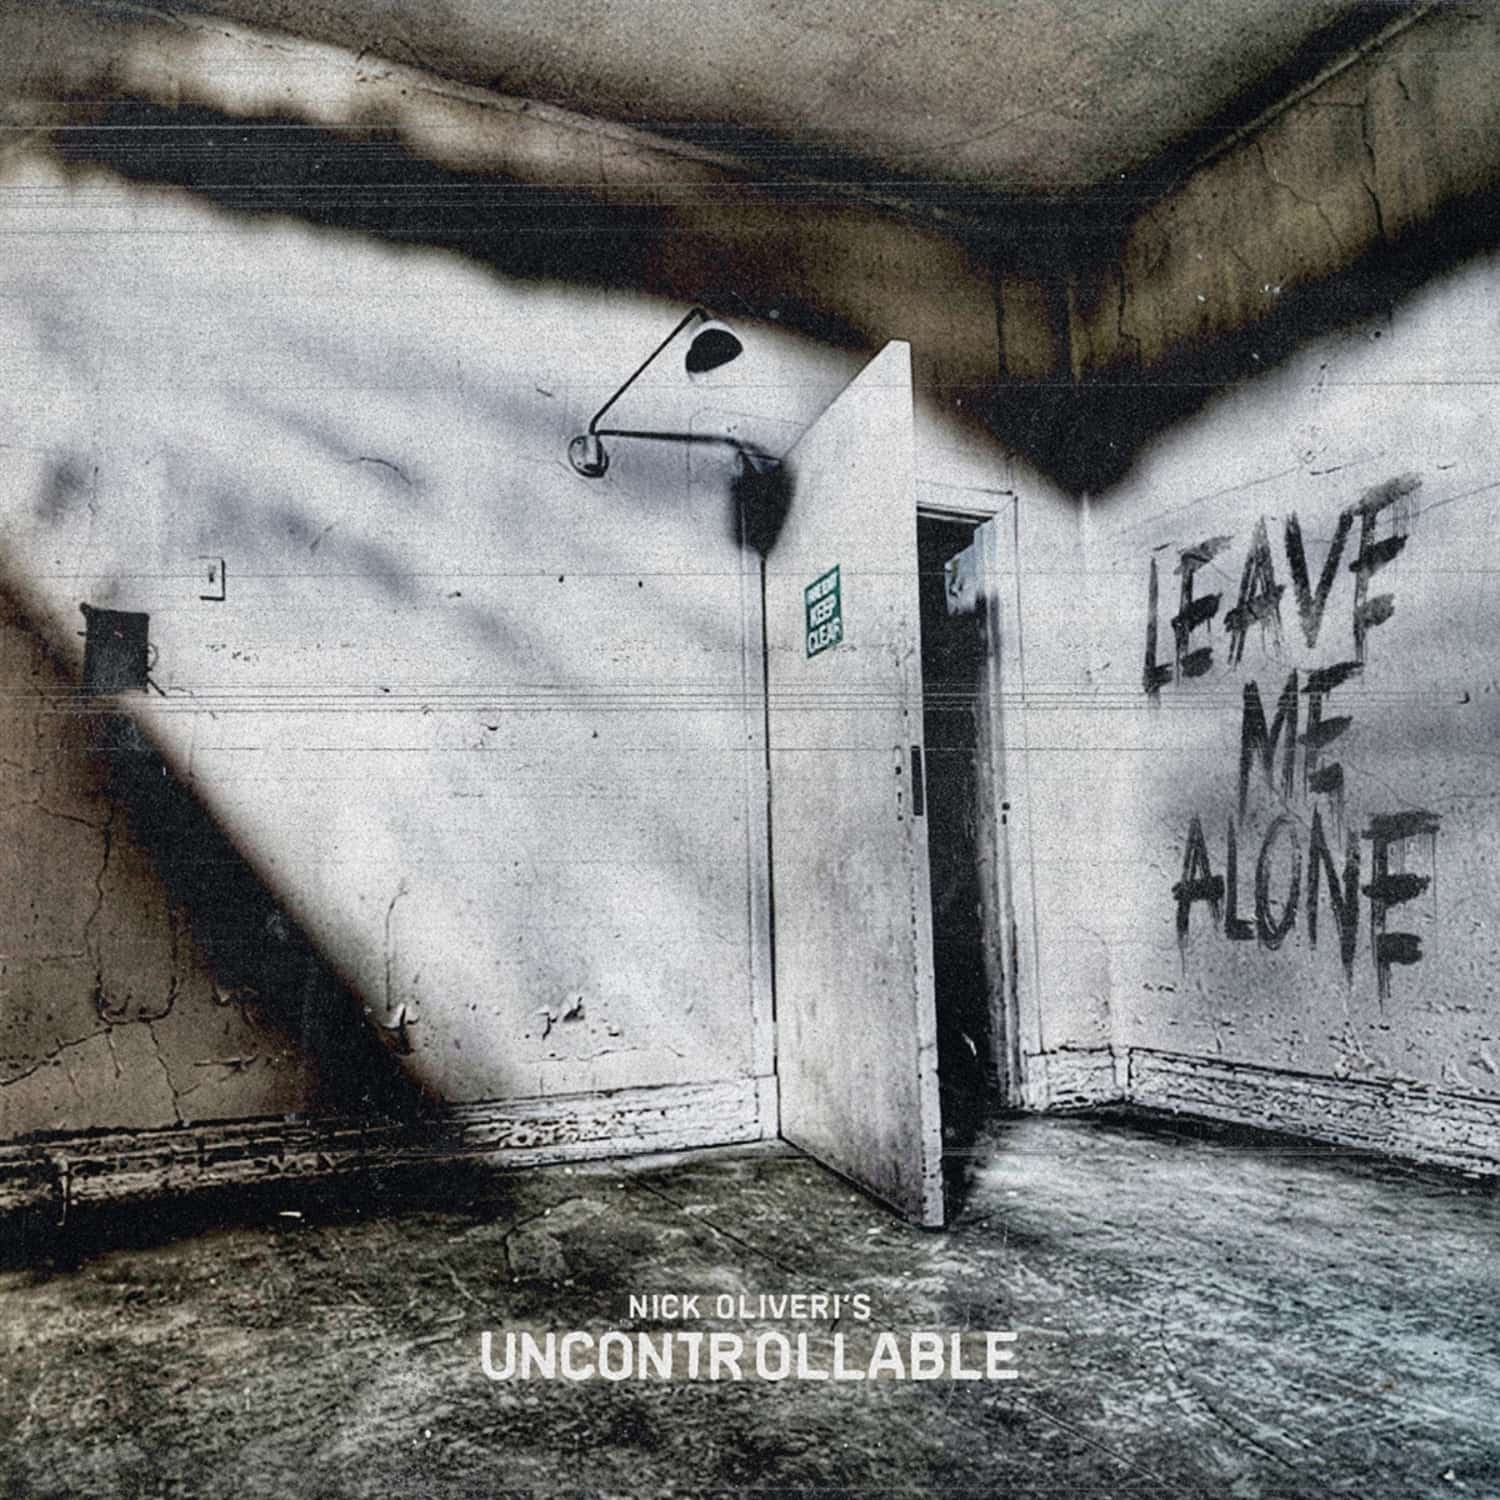 Nick Oliveri s Uncontrollable - LEAVE ME ALONE 